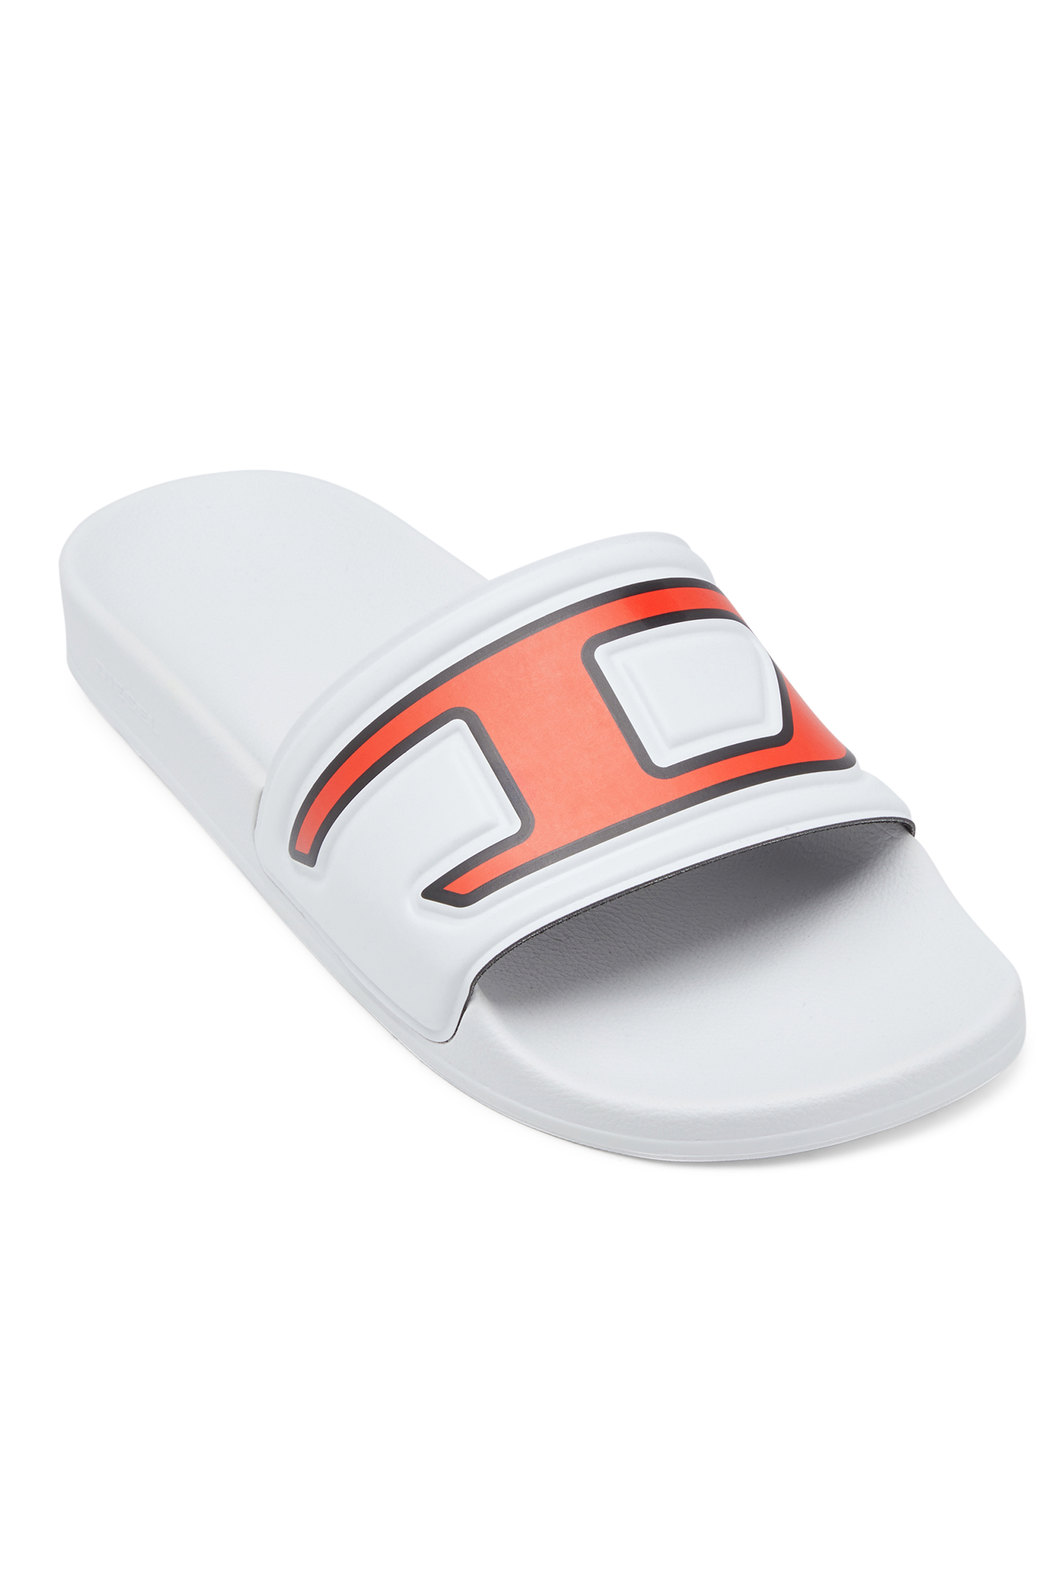 Sa-Mayemi D - Pool slides with embedded D logo